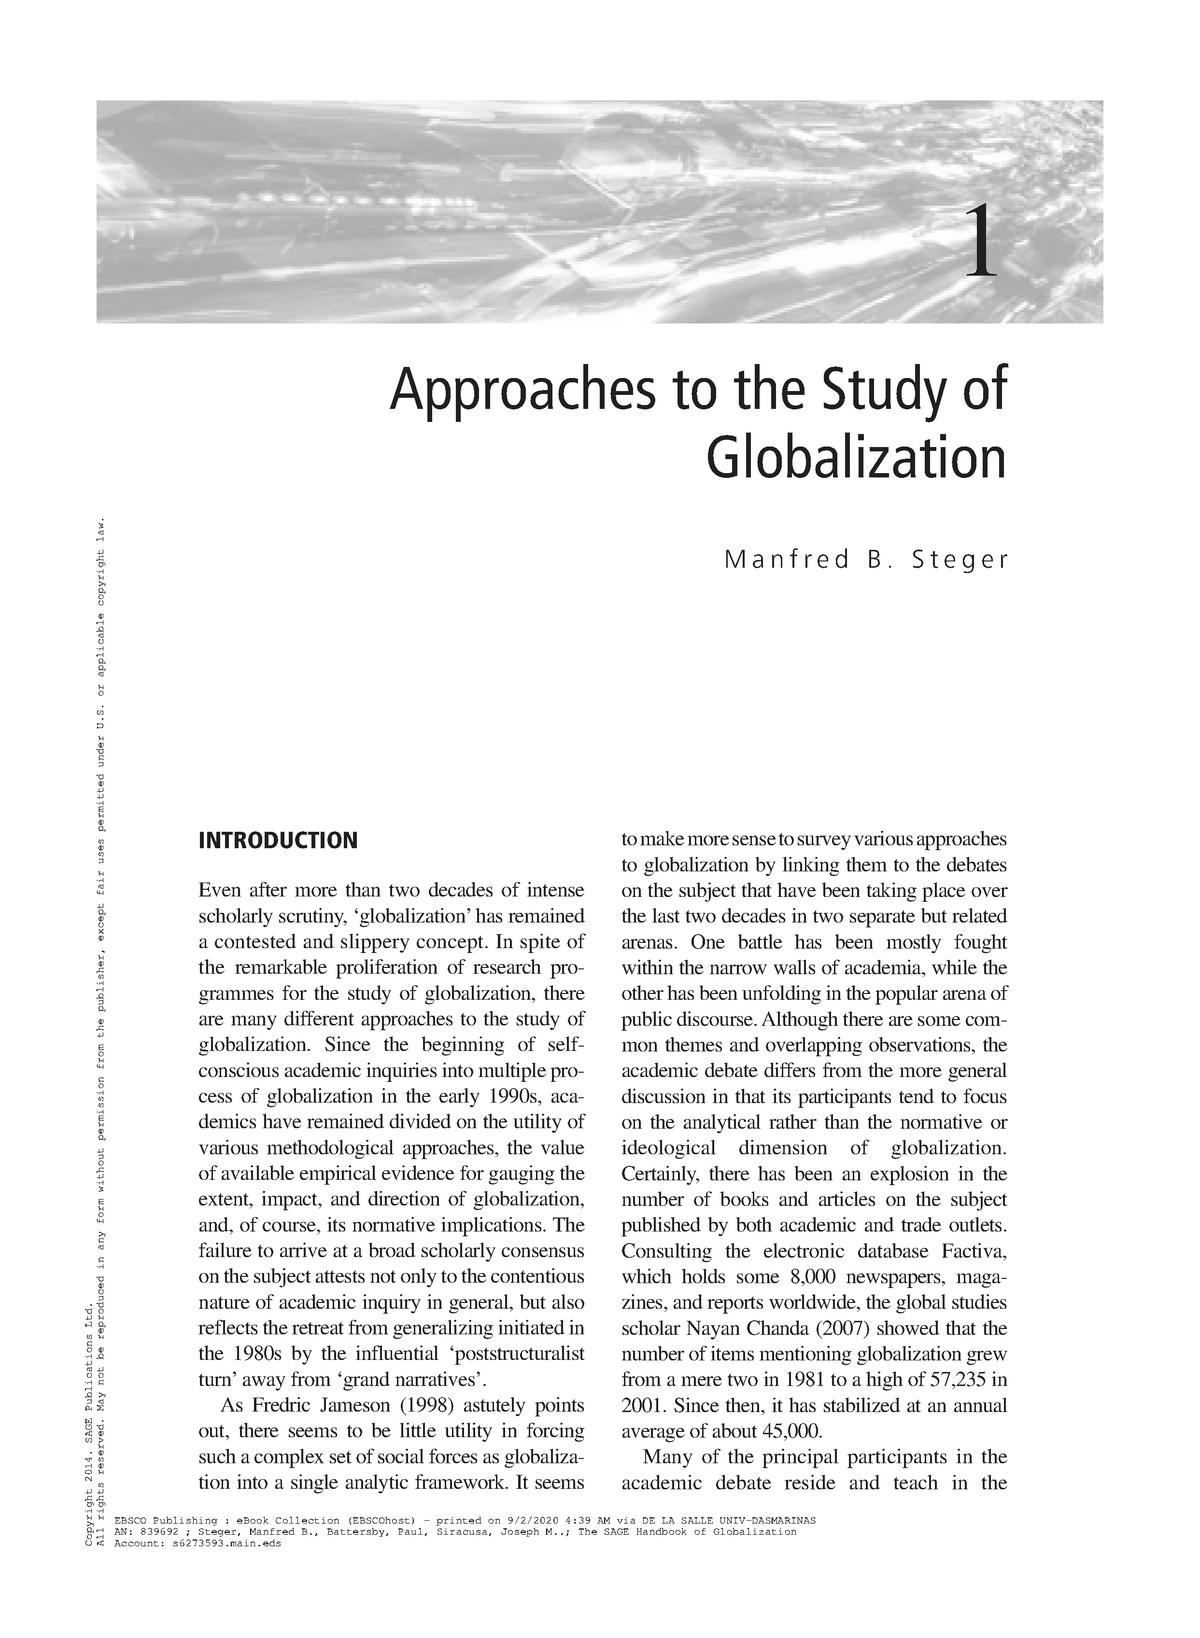 article research or study about globalization